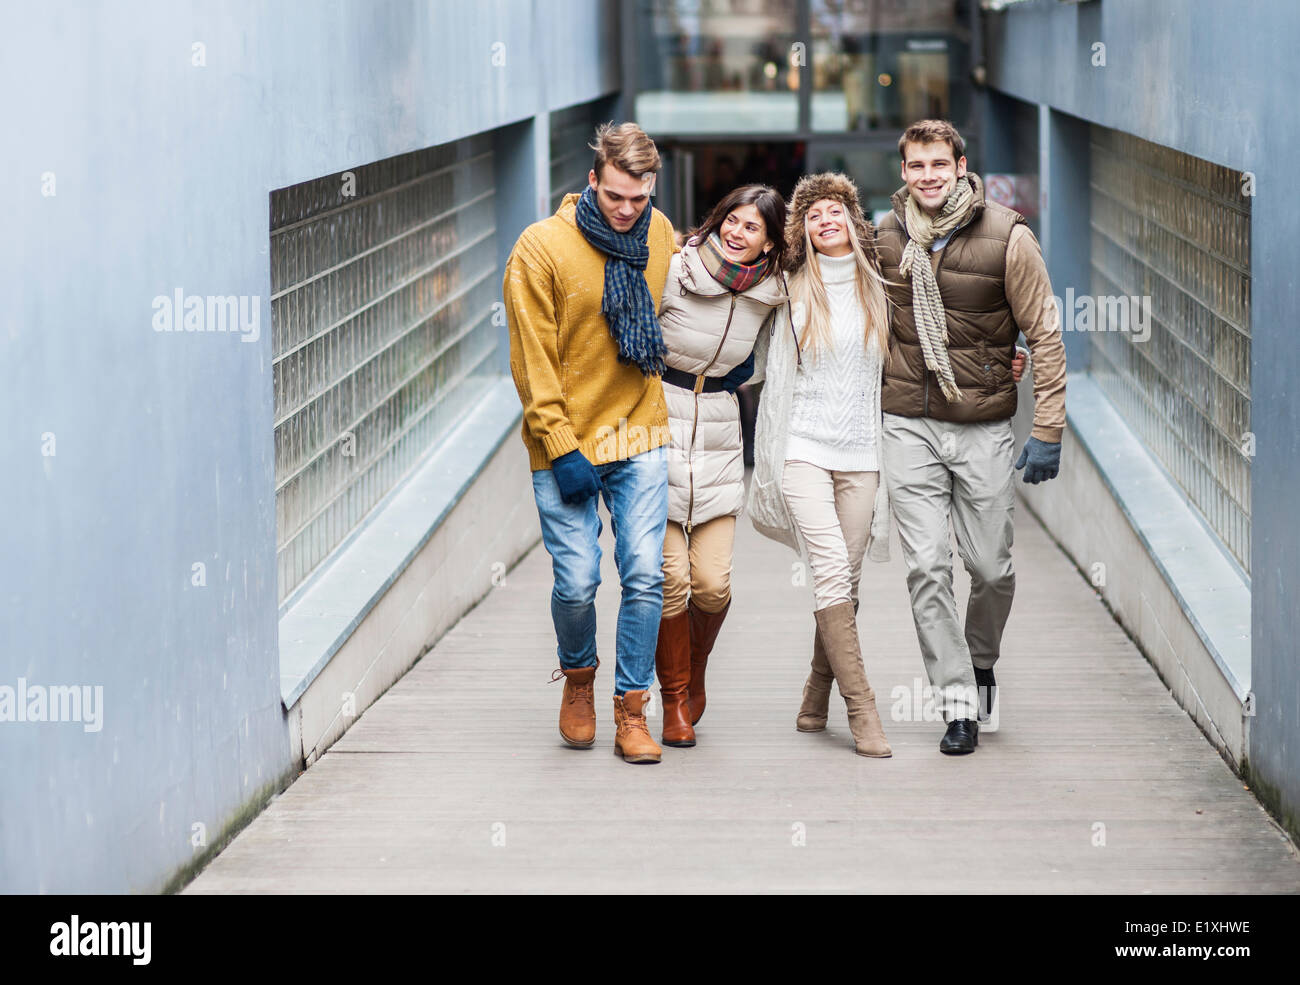 Full length of young friends on walkway Stock Photo